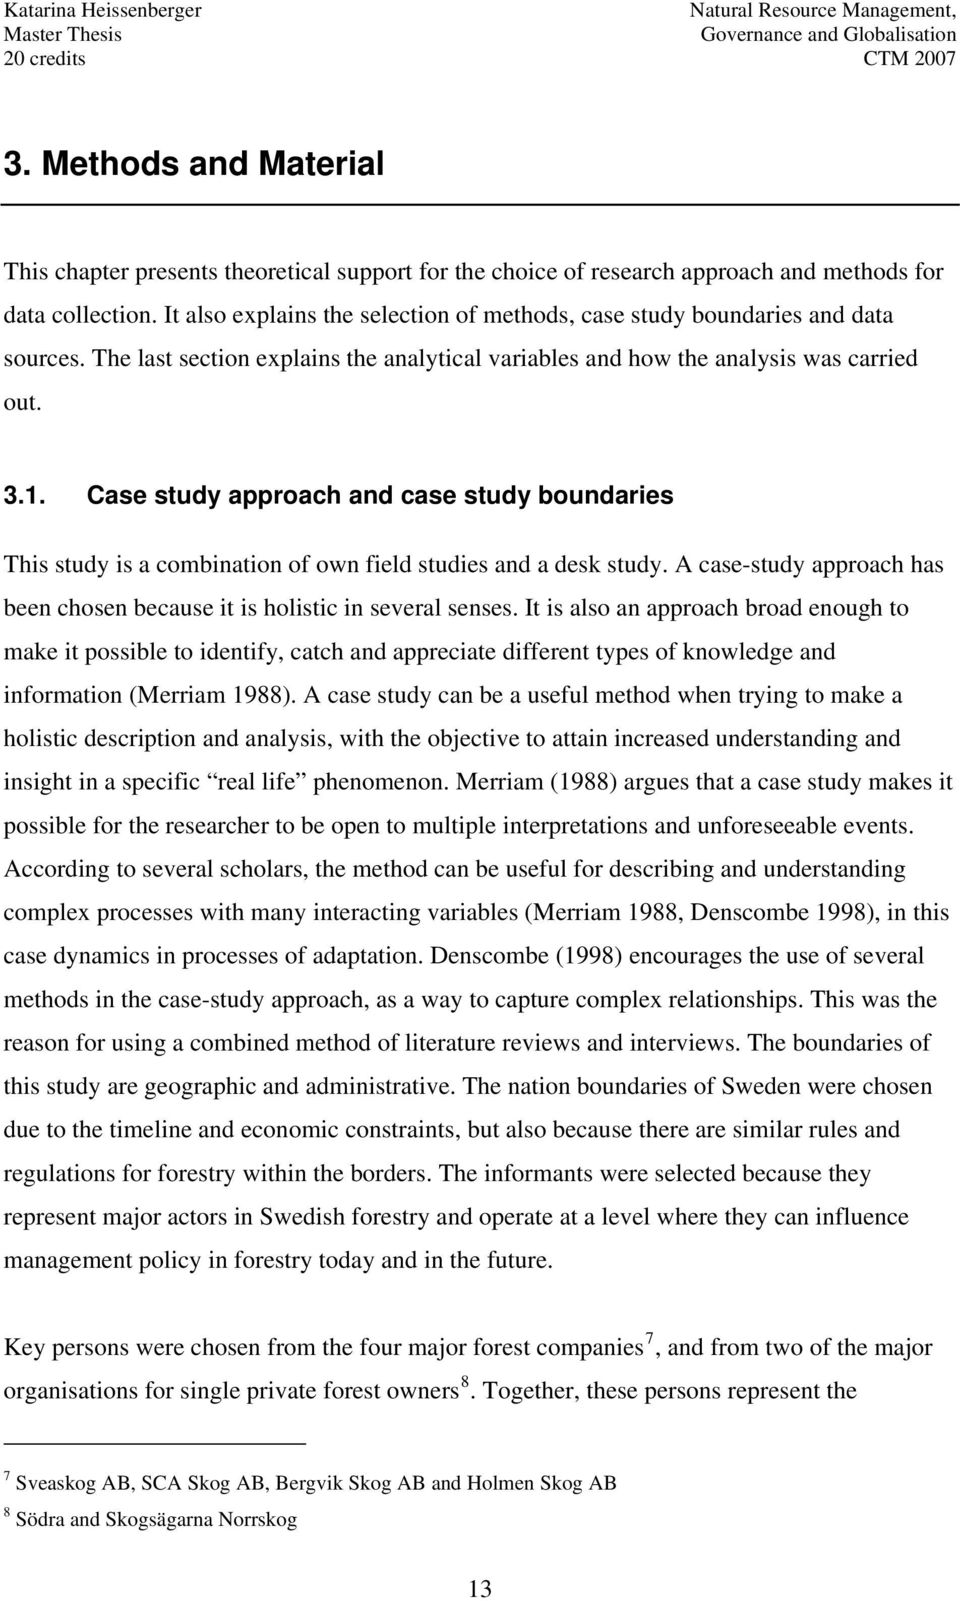 Case study approach and case study boundaries This study is a combination of own field studies and a desk study. A case-study approach has been chosen because it is holistic in several senses.